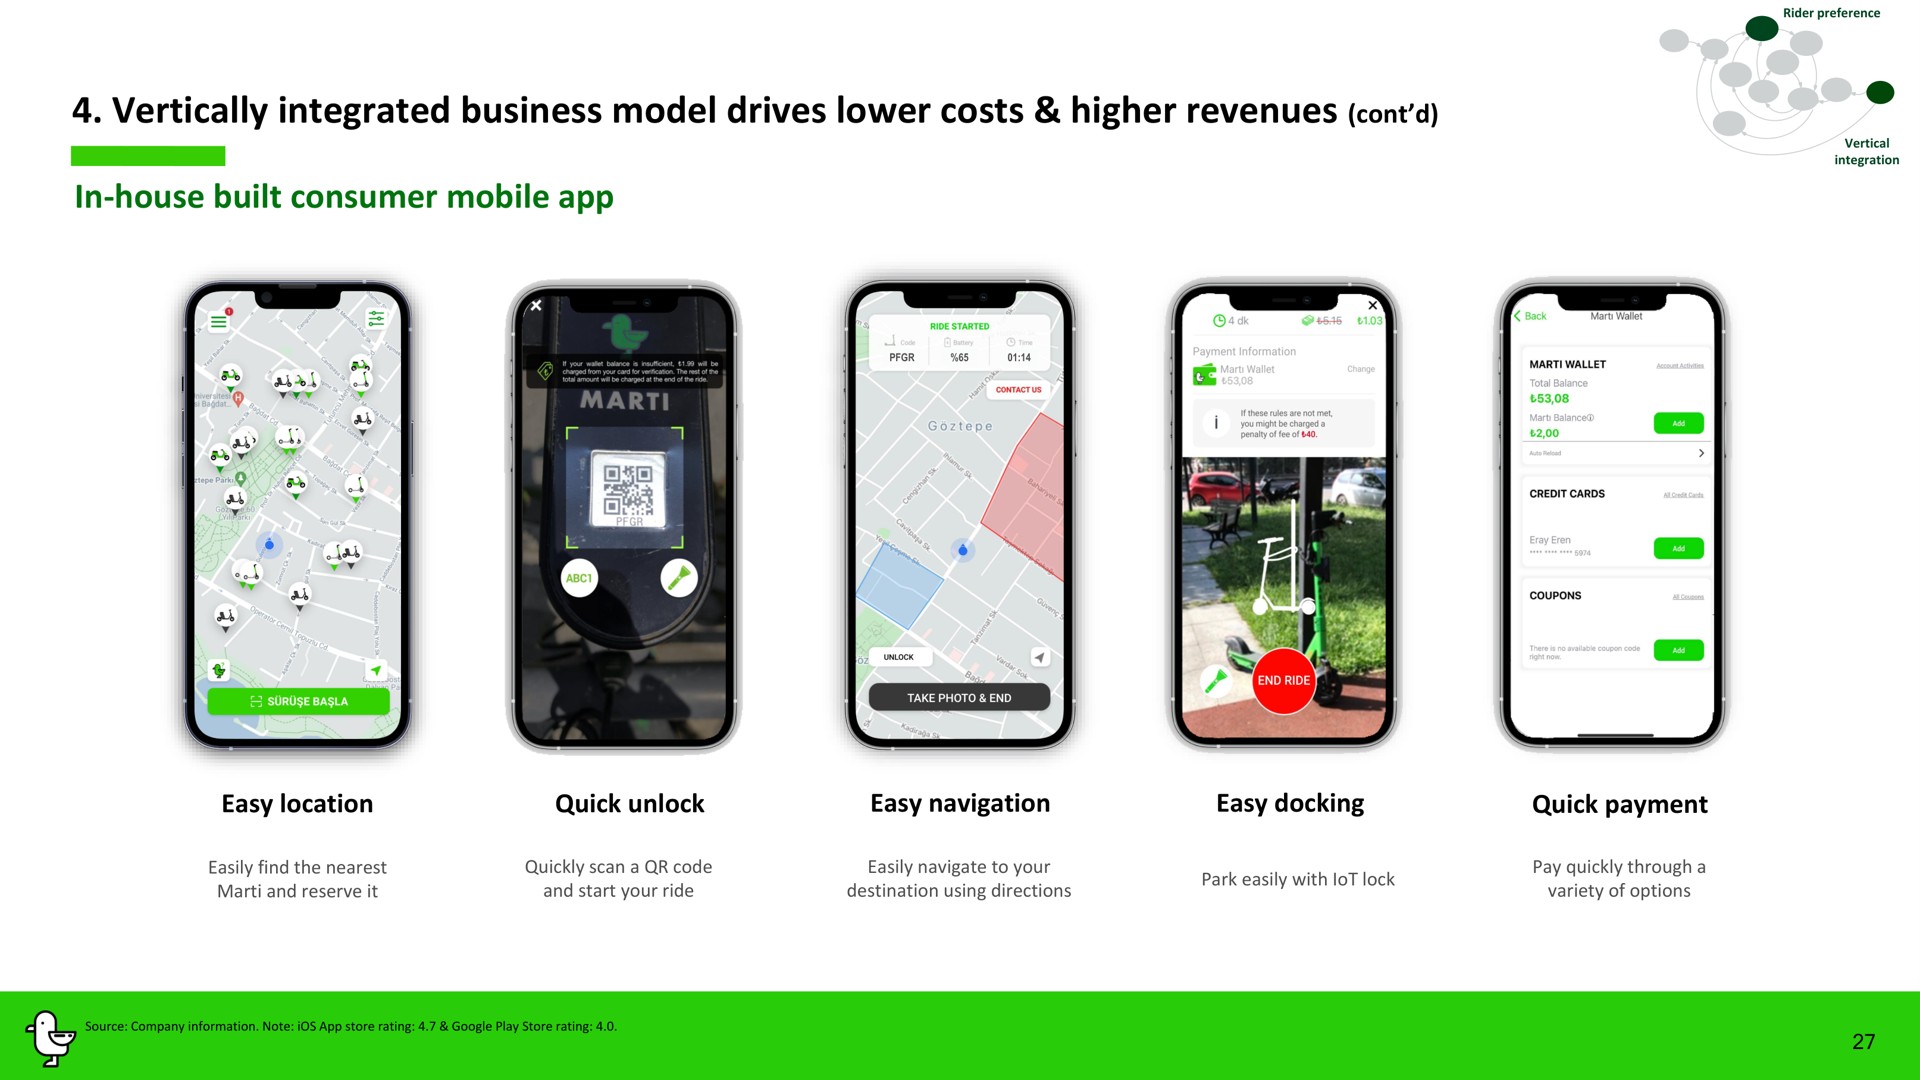 vertically integrated business model drives lower costs higher revenues in house built consumer mobile a integration | Marti